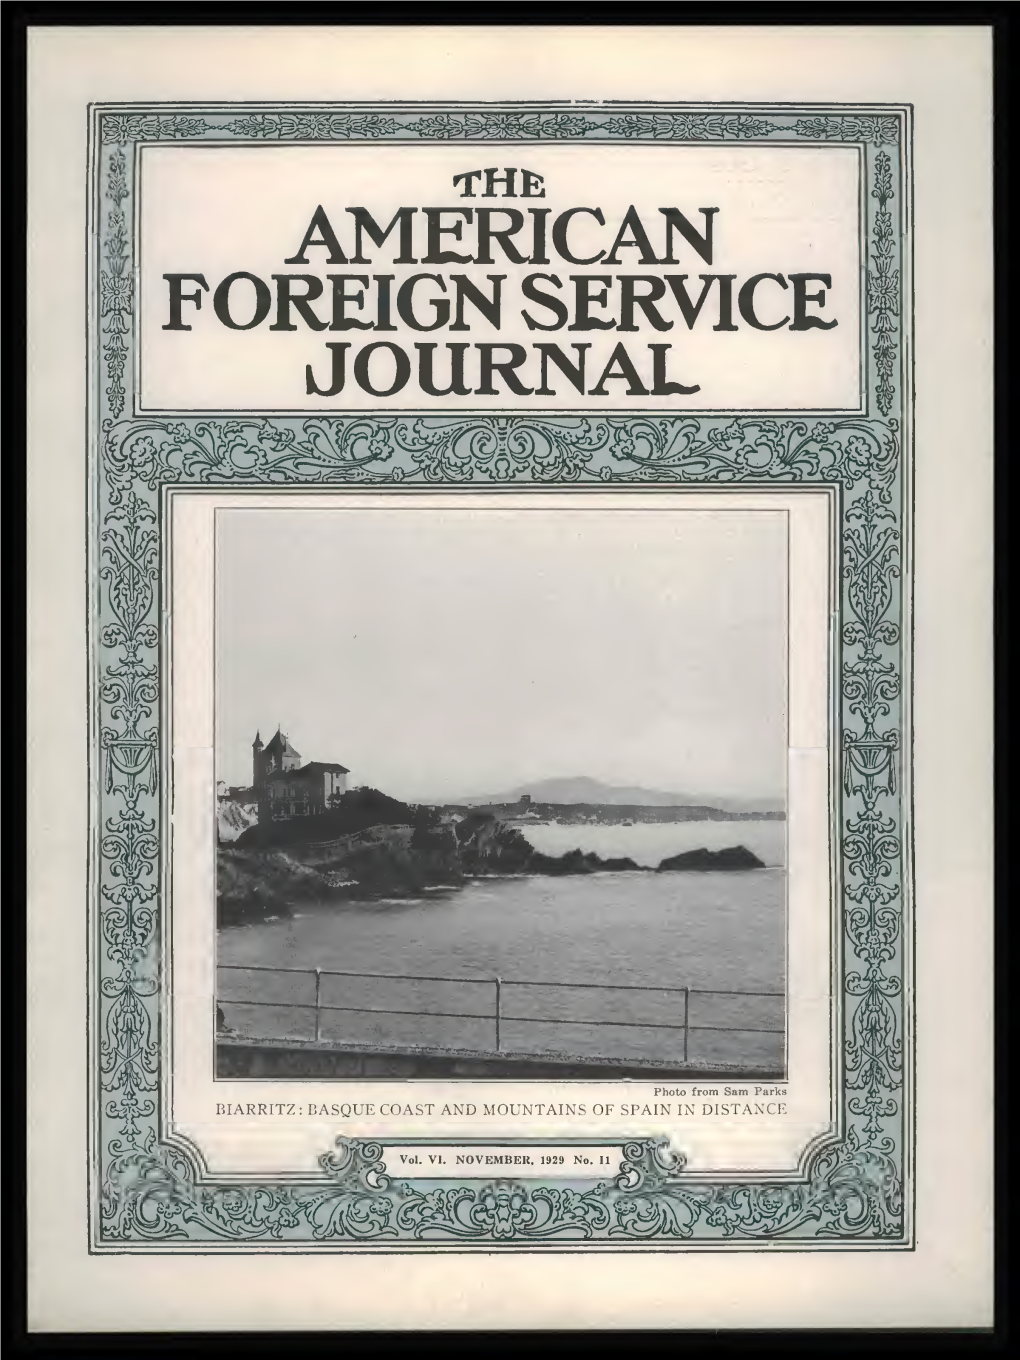 The Foreign Service Journal, November 1929